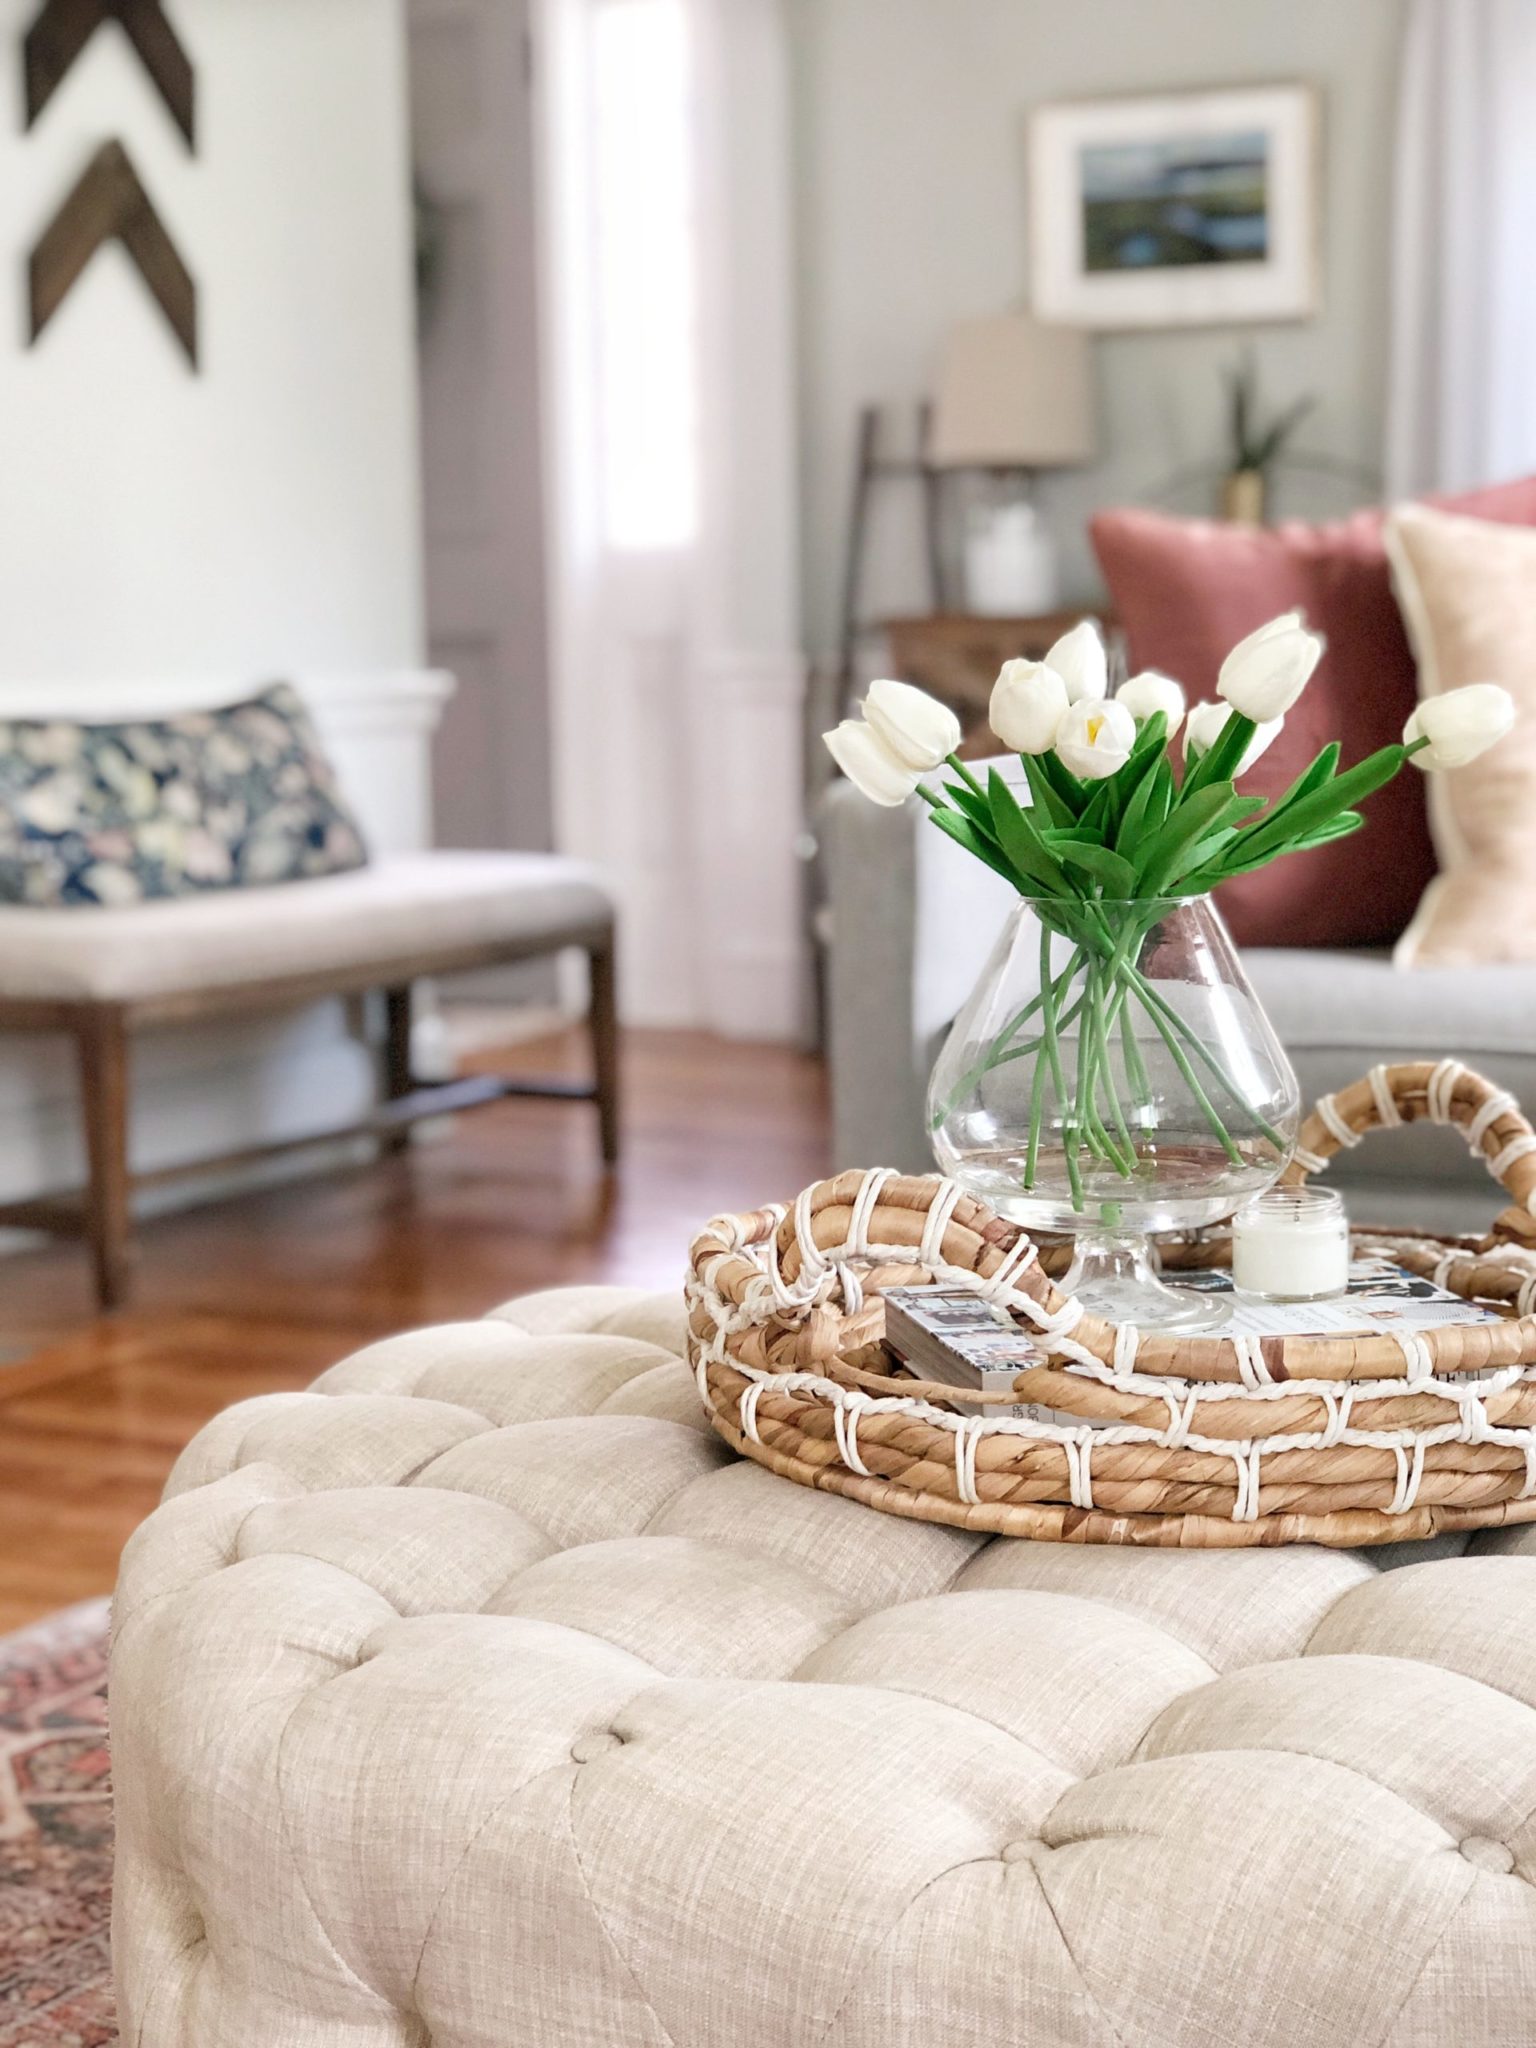 5 Ways to Get out of a Room Rut - Jordecor